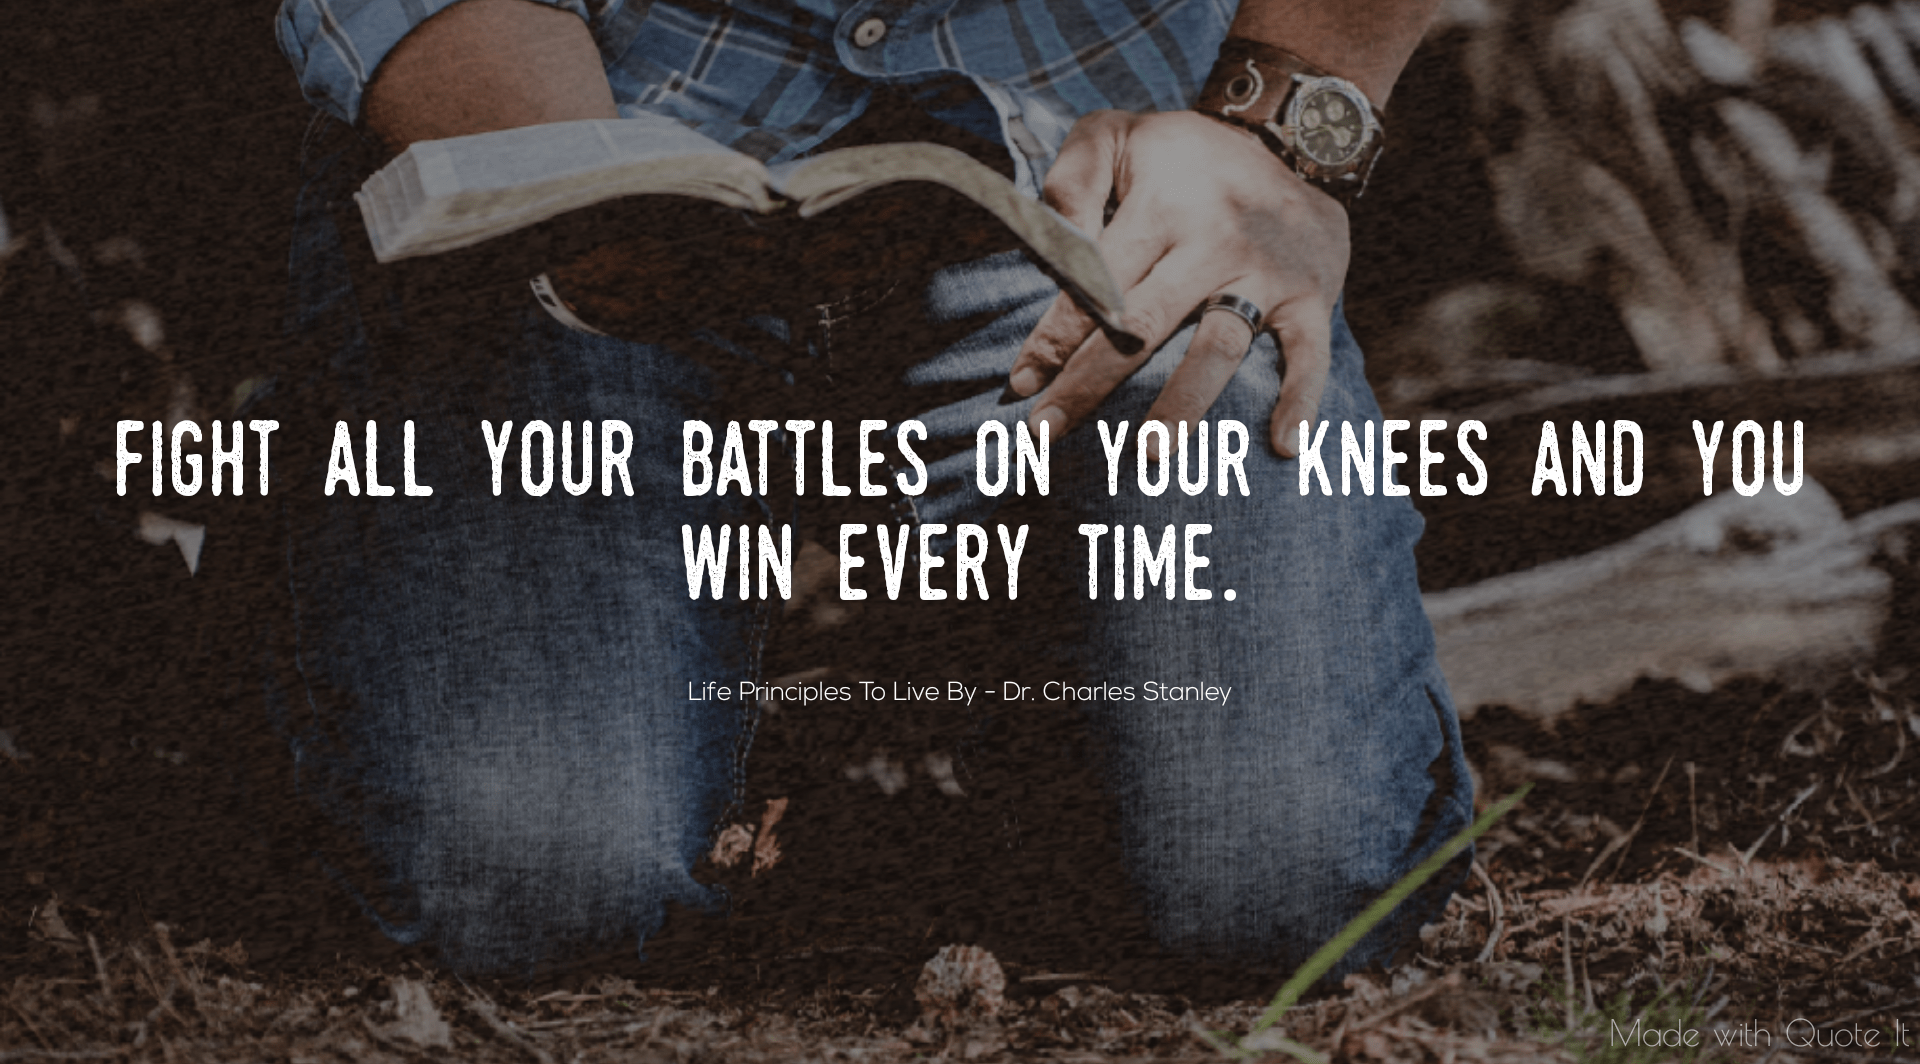 Life Principle 8: Fight all your battles on your knees and you win every time.